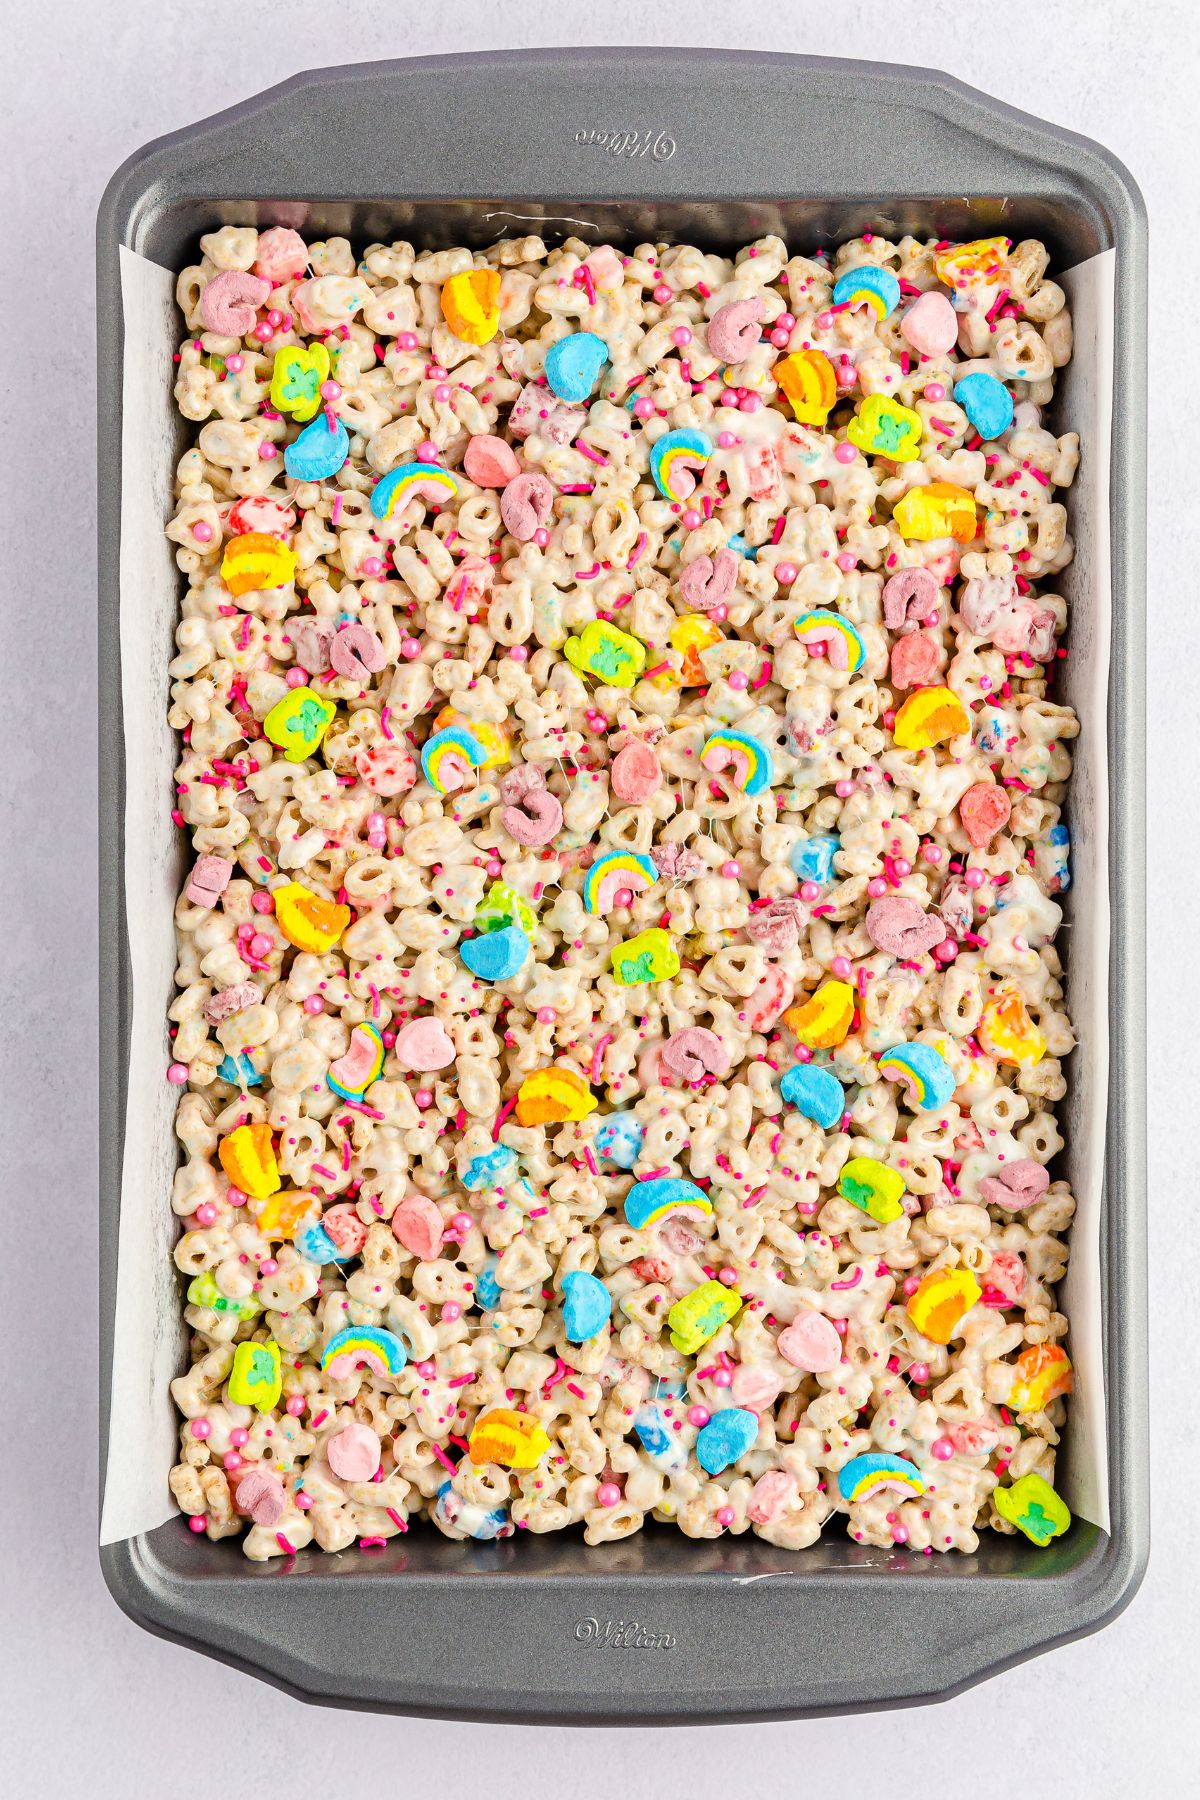 pan with pressed charms cereal bars